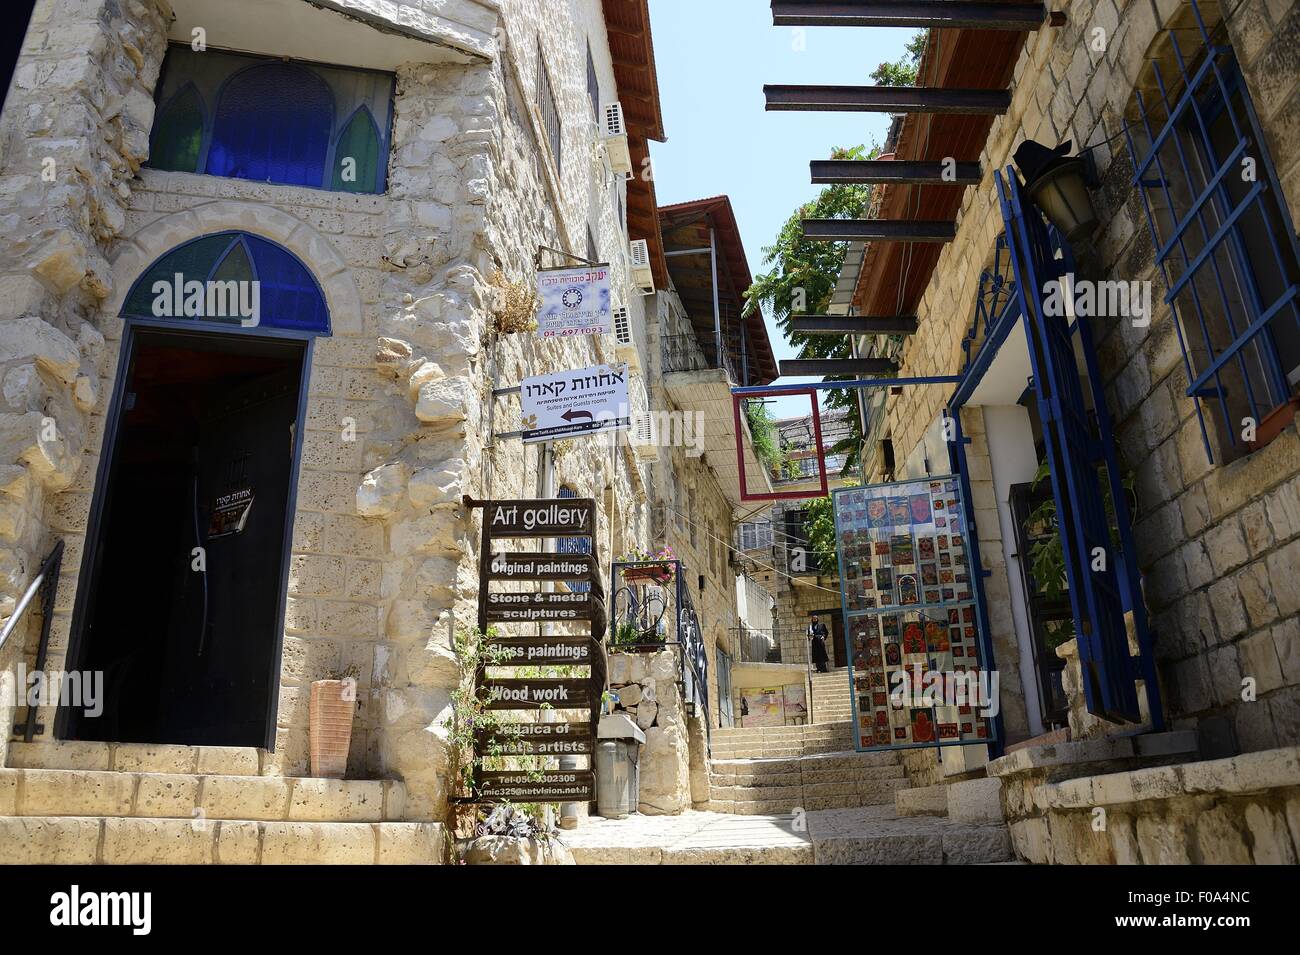 View of art gallery in old town, Alley, Safed, Israel Stock Photo